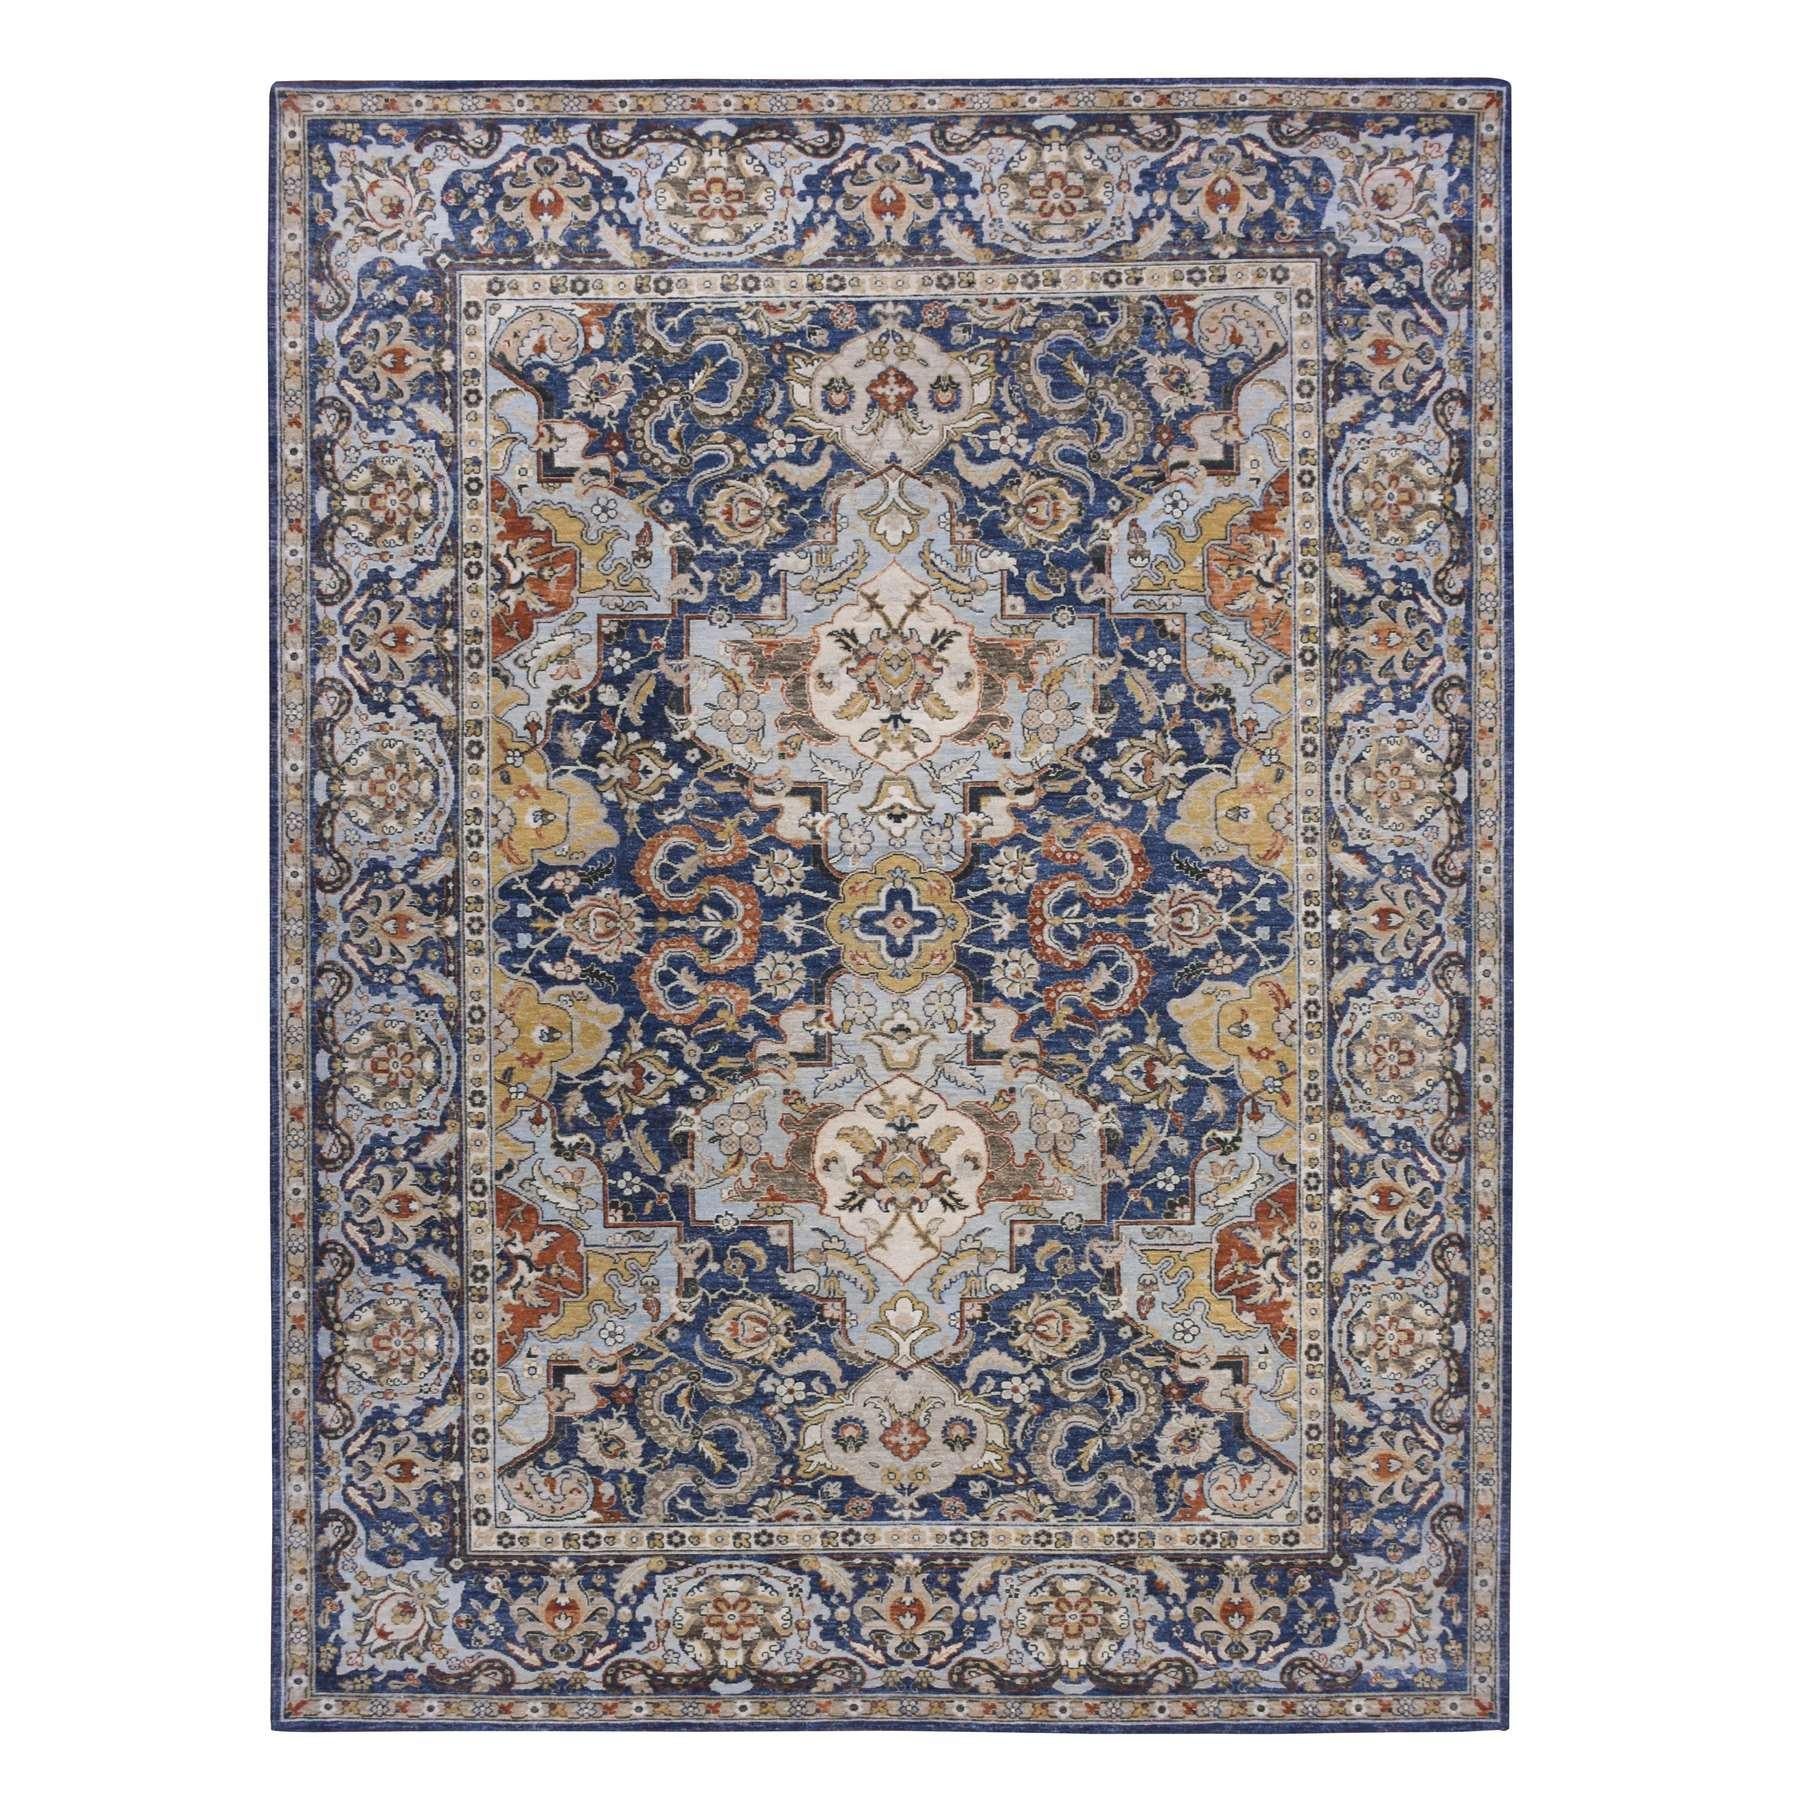 Beacon Blue Antique Persian Isphahan Inspired Wool Hand Knotted Rug 9'x12'3"